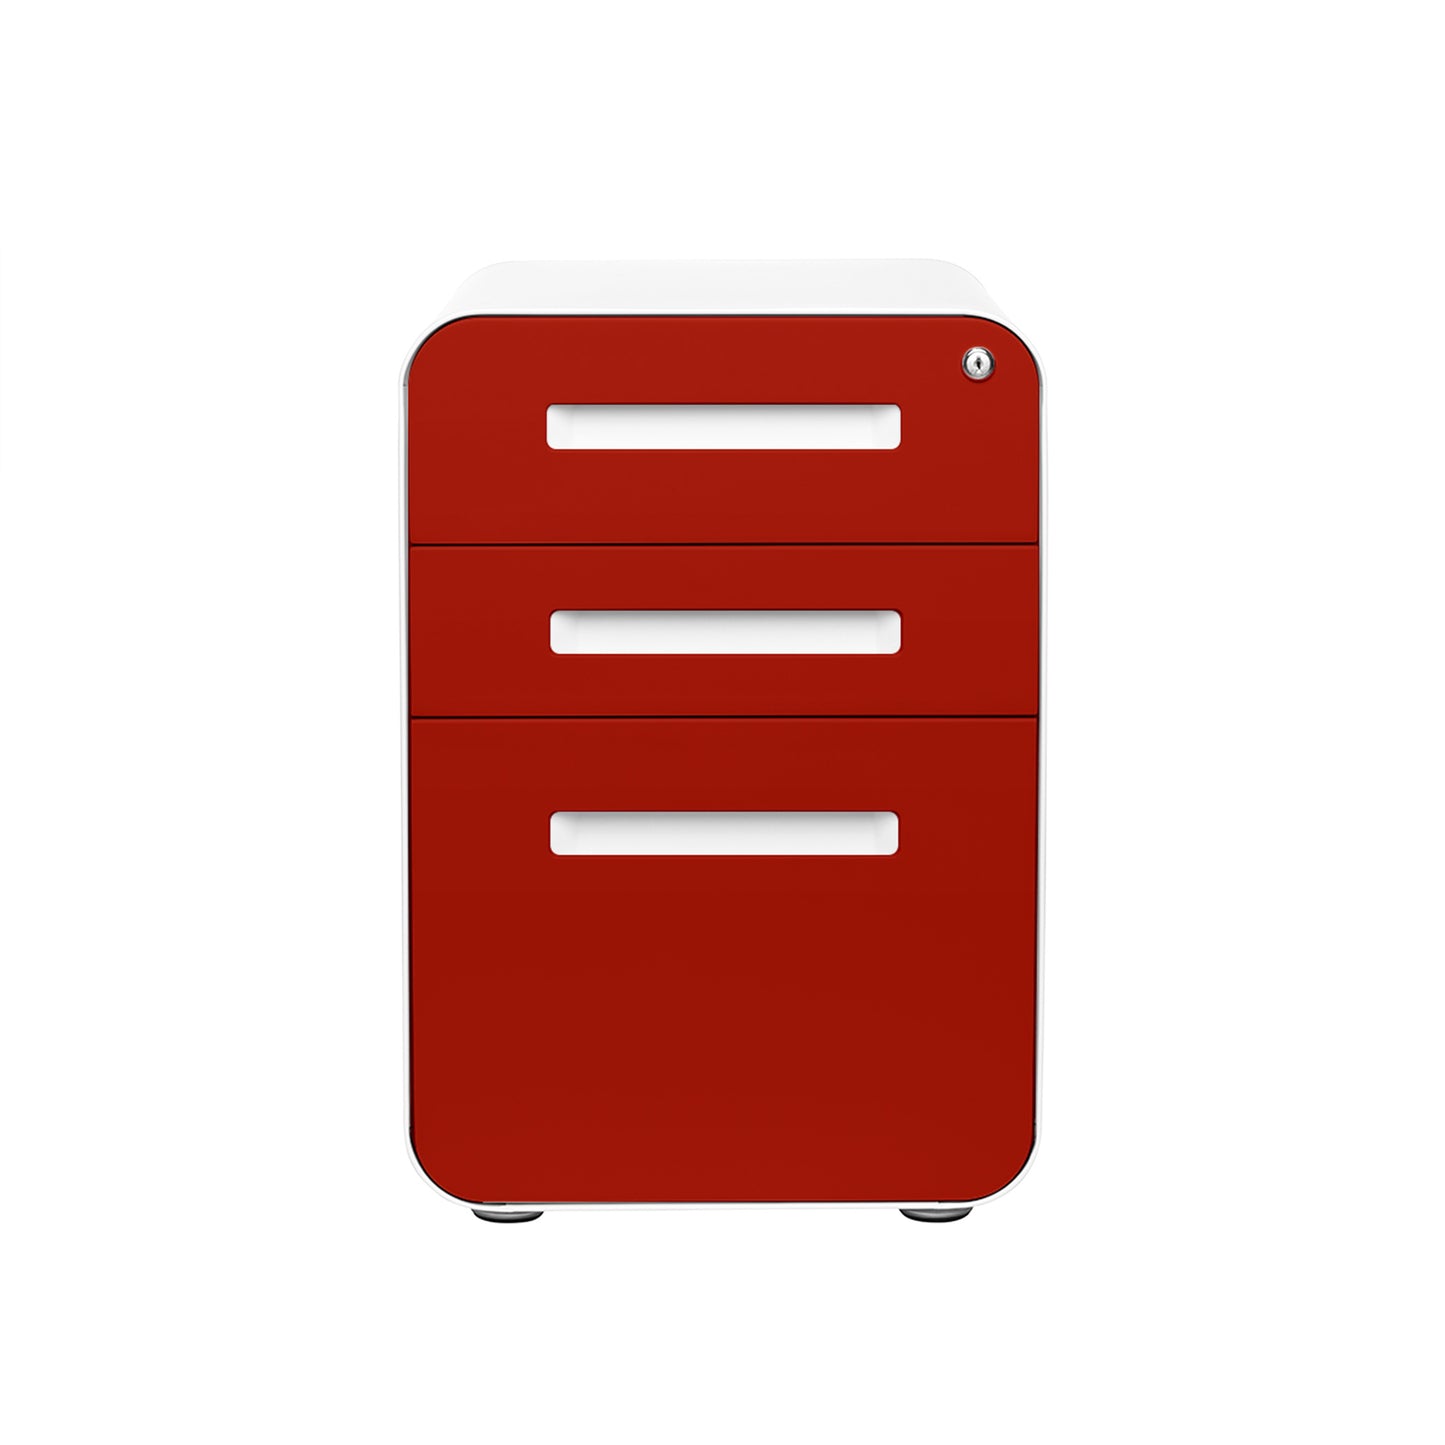 Stockpile Curve File Cabinet (Red Faceplate)